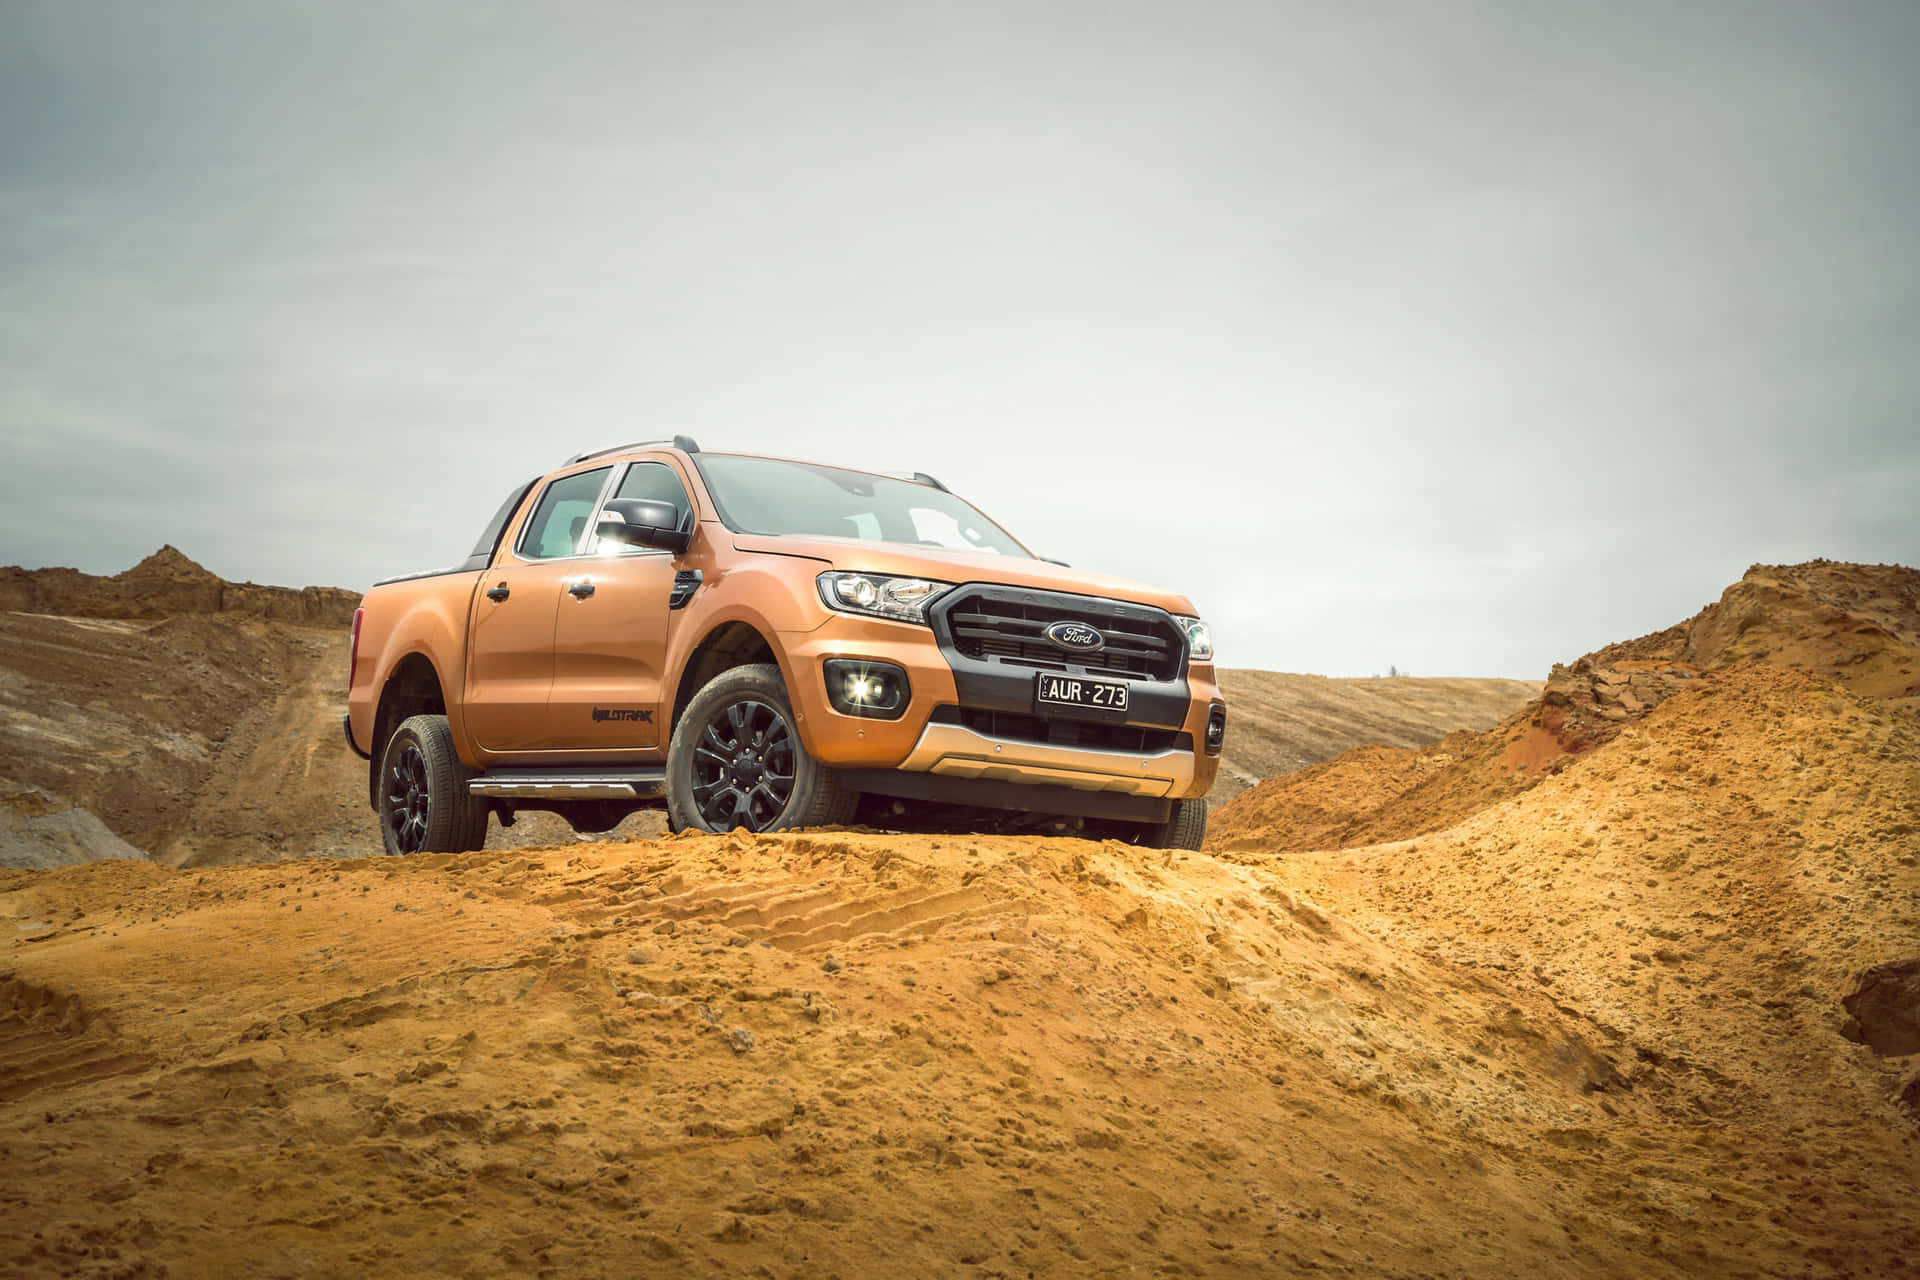 The Ford Ranger Xlt Is Parked On A Dirt Road